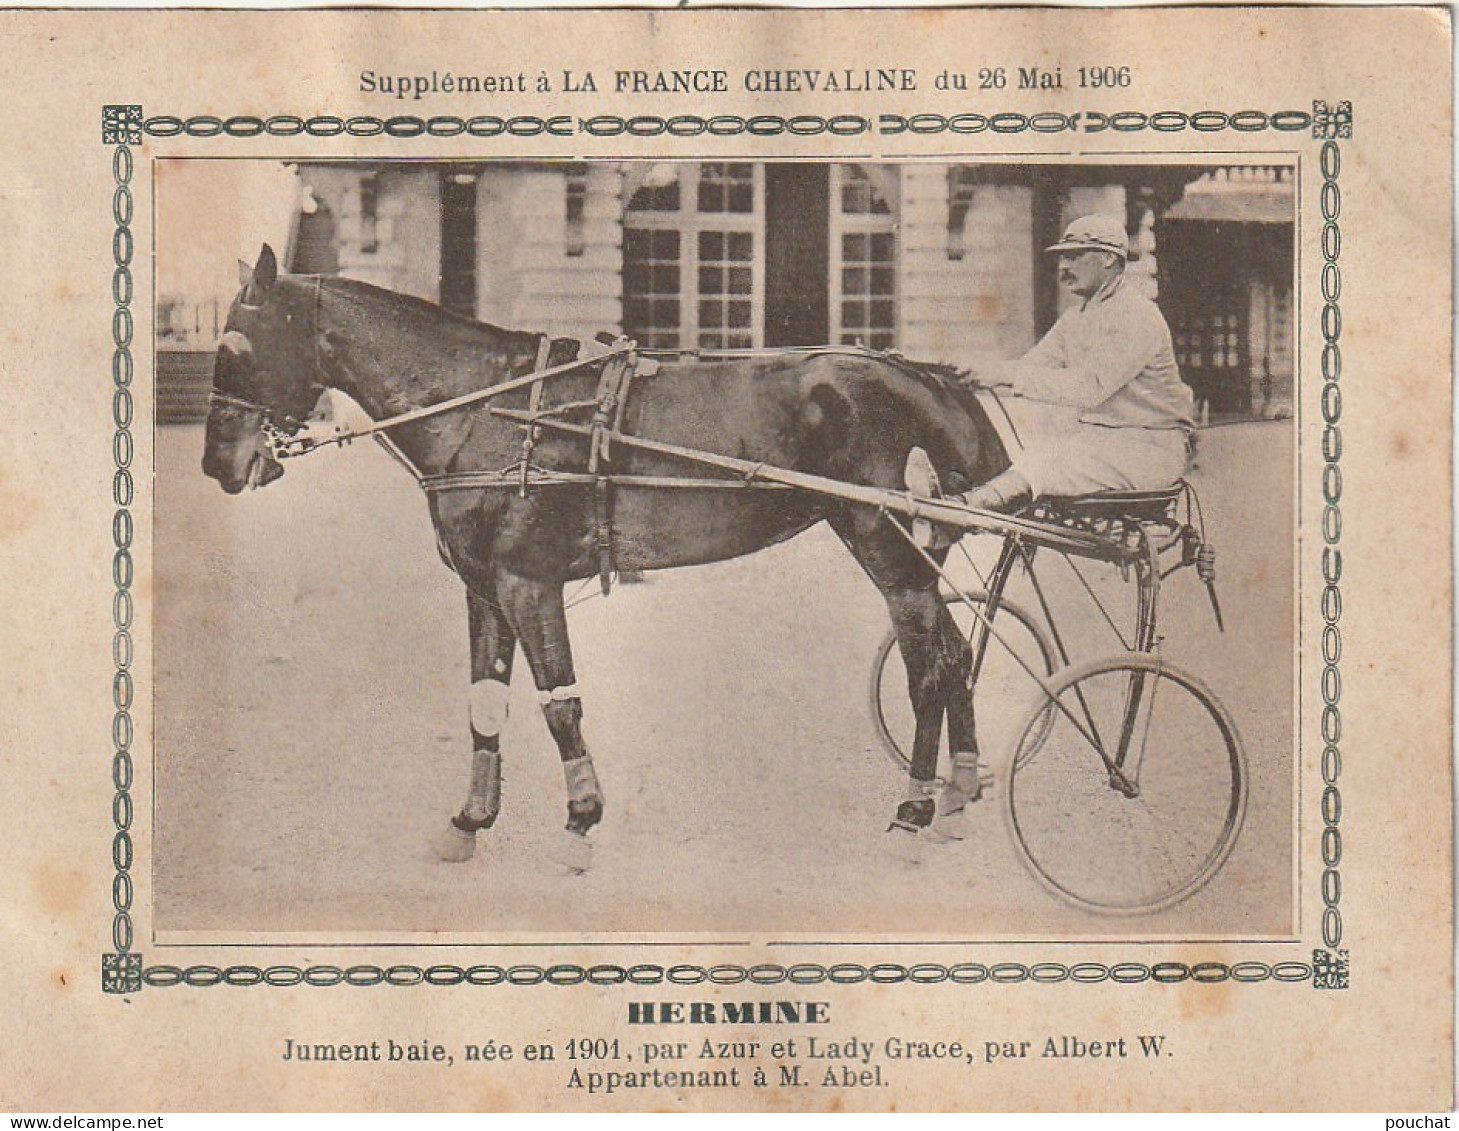 AA+ - " HERMINE " - JUMENT BAIE APPARTENANT A M. ABEL - SUPPL. " FRANCE CHEVALINE " , MAI 1906 - SULKY - Horse Show